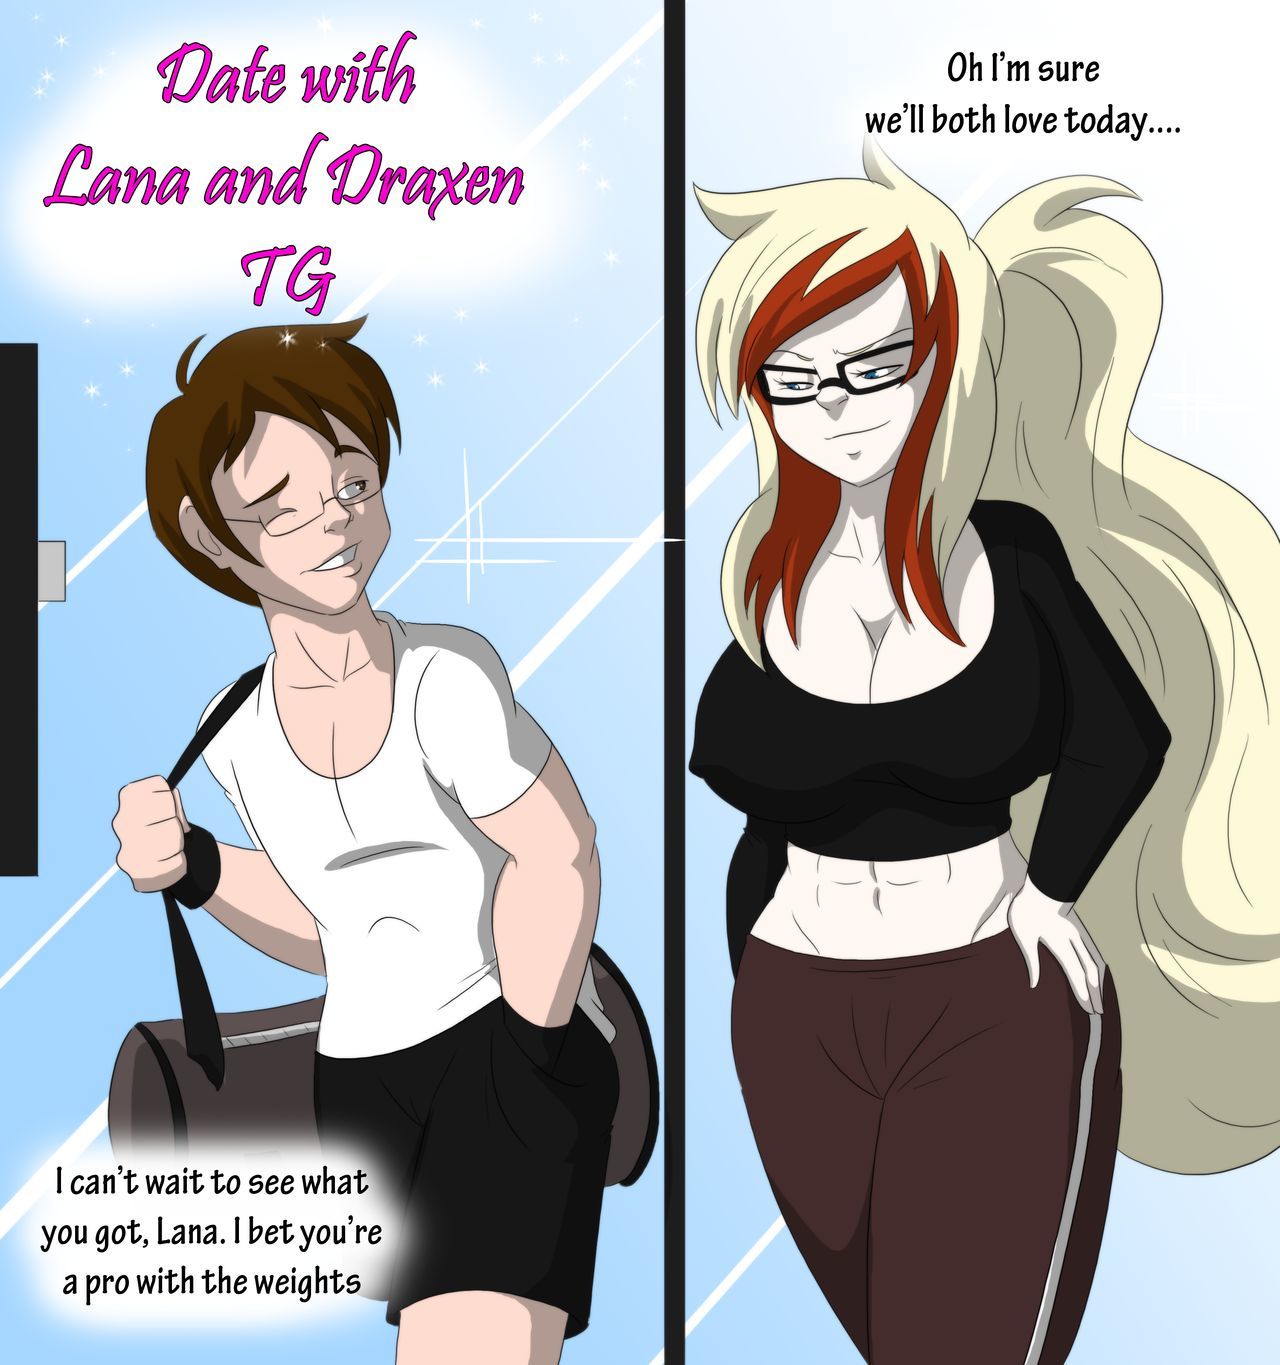 Date with Lana TG Daxen Gym Date by TFSubmissions page 1